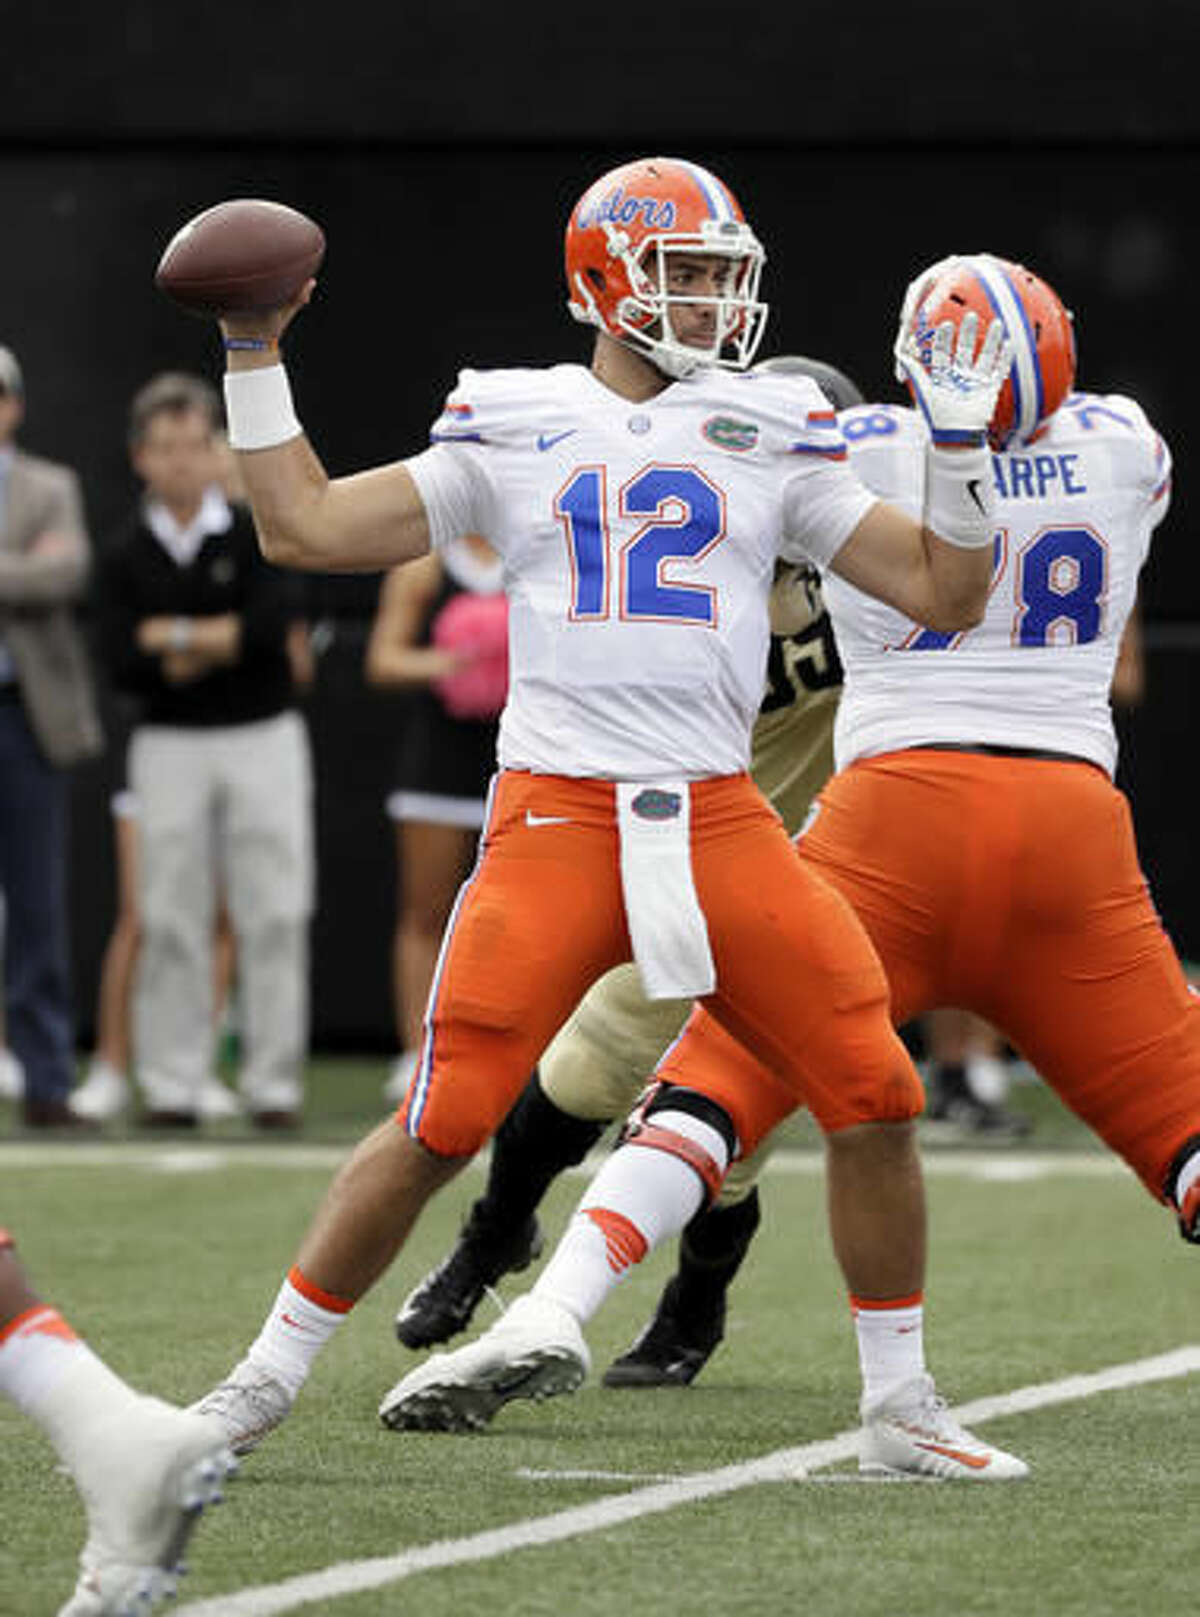 FILE - In this Oct. 1, 2016, file photo, Florida quarterback Austin Appleby passes against Vanderbilt in the second half of an NCAA college football game in Nashville, Tenn. Former Purdue quarterbacks Austin Appleby and Danny Etling will have a famous alum watching from afar Saturday. New Orleans Saints star Drew Brees will tune it to see Appleby and Etling square off when No. 21 Florida plays at 16th-ranked LSU, a game that will help decide the Southeastern Conference’s Eastern Division. (AP Photo/Mark Humphrey, File)